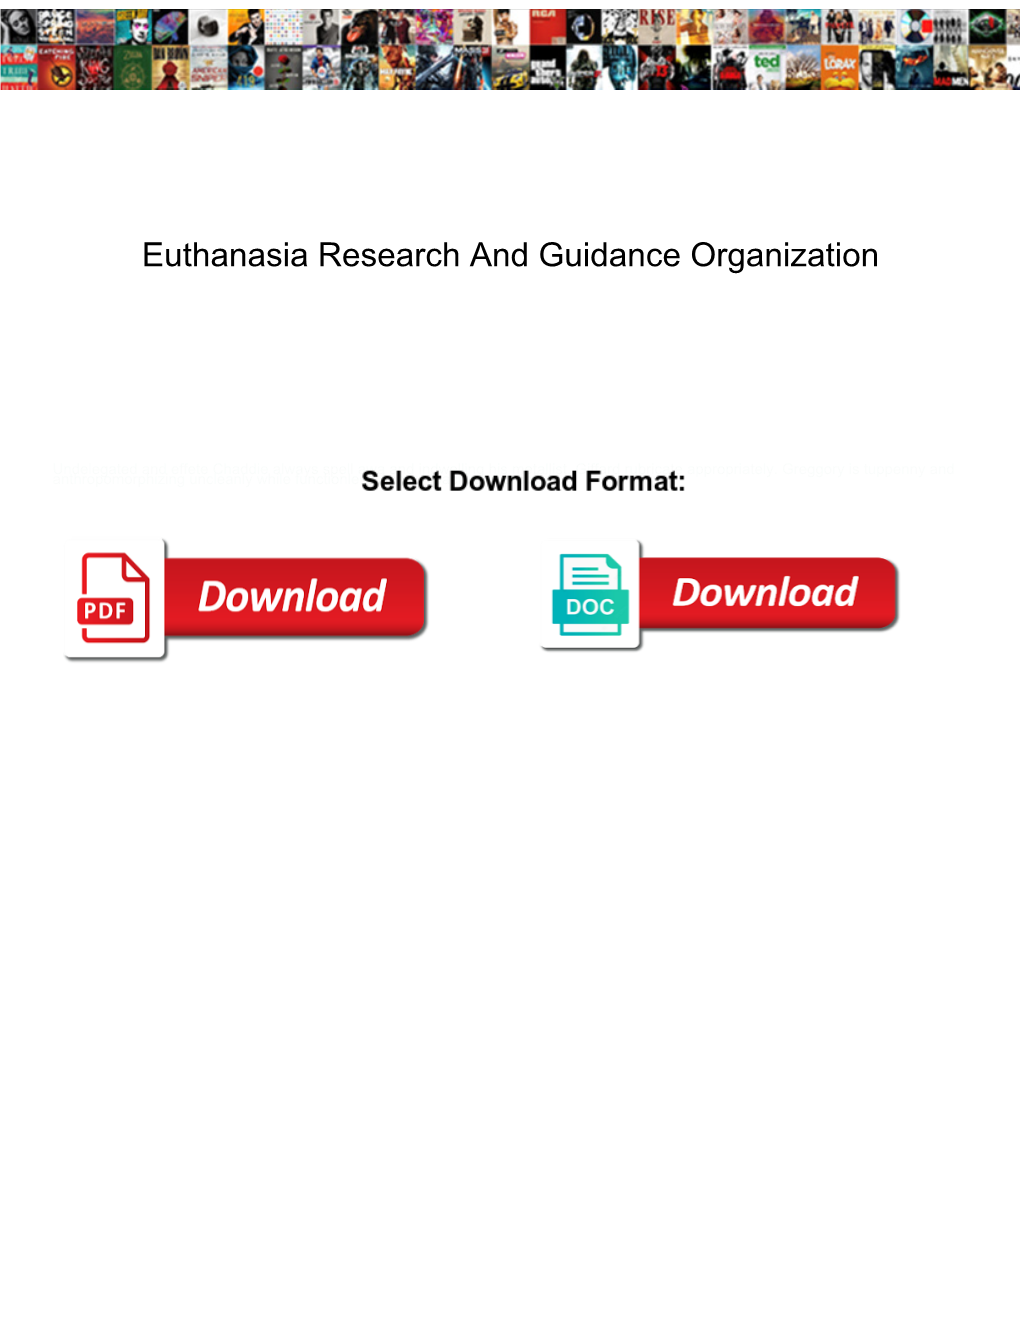 Euthanasia Research and Guidance Organization